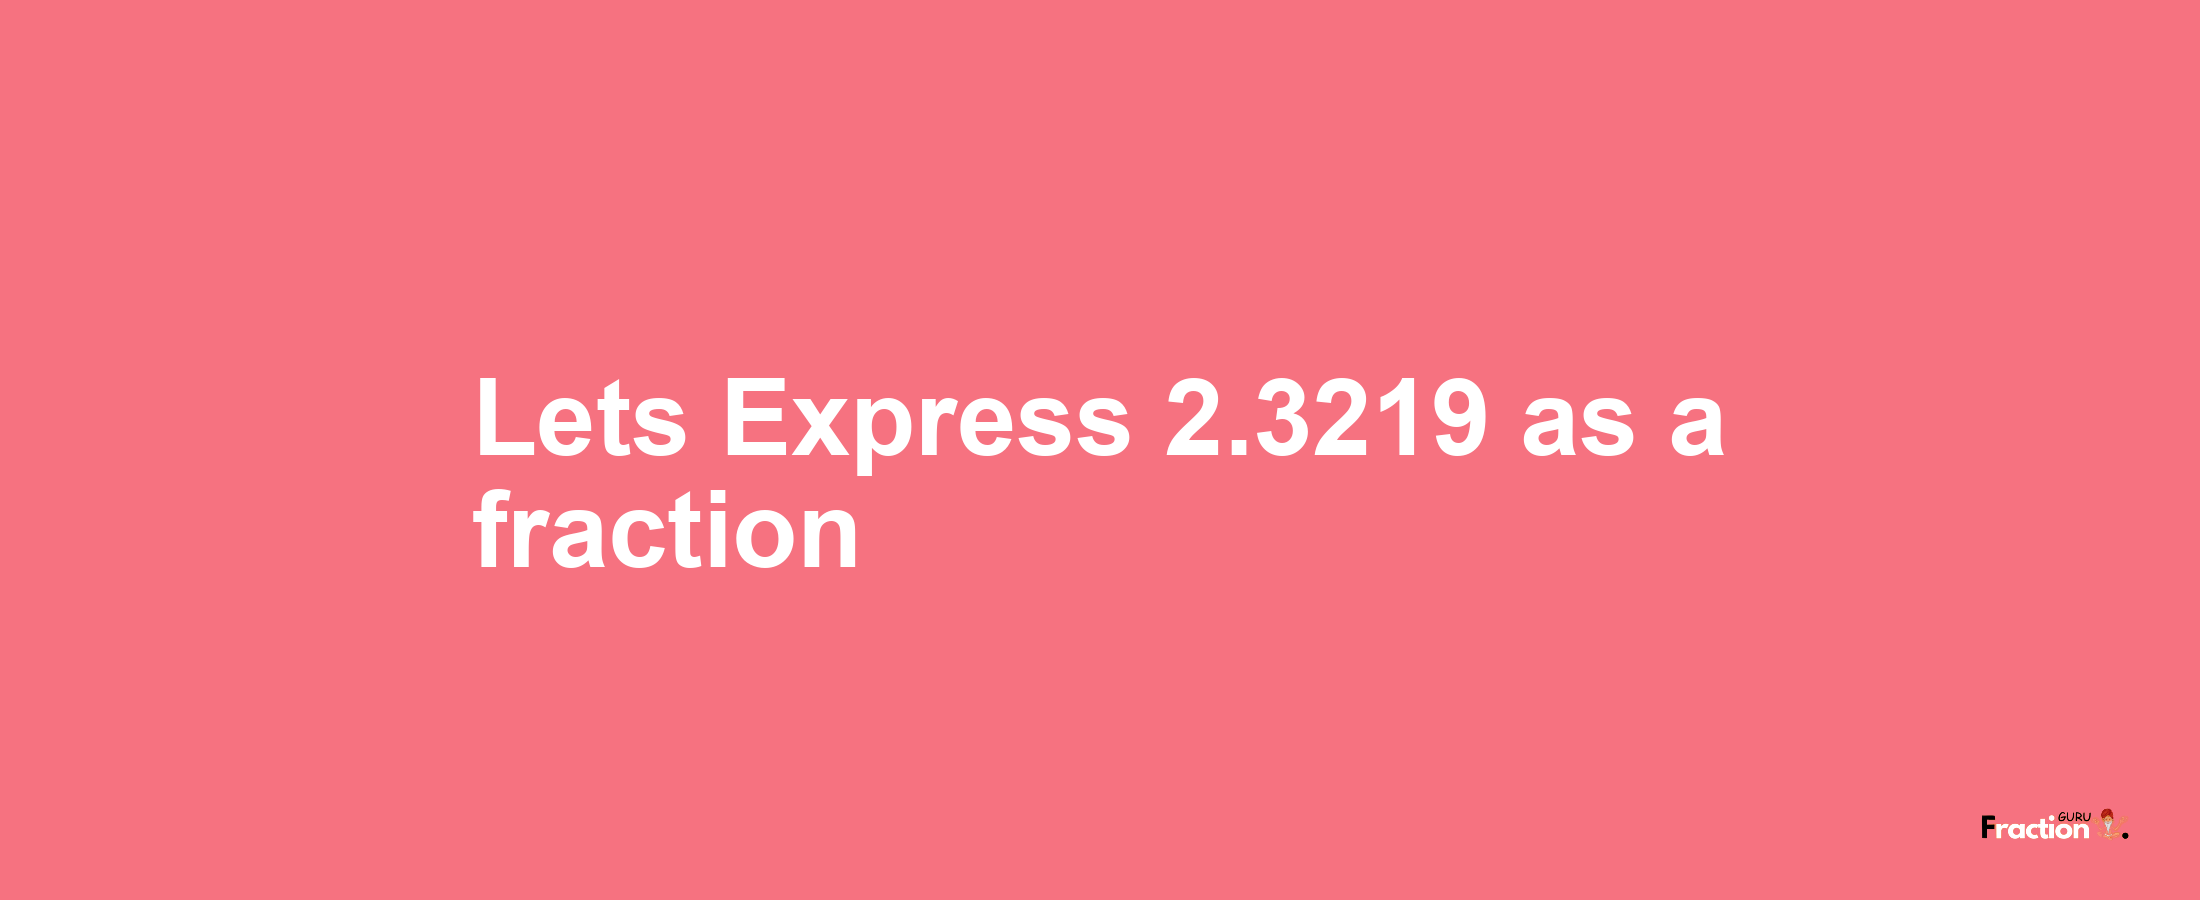 Lets Express 2.3219 as afraction